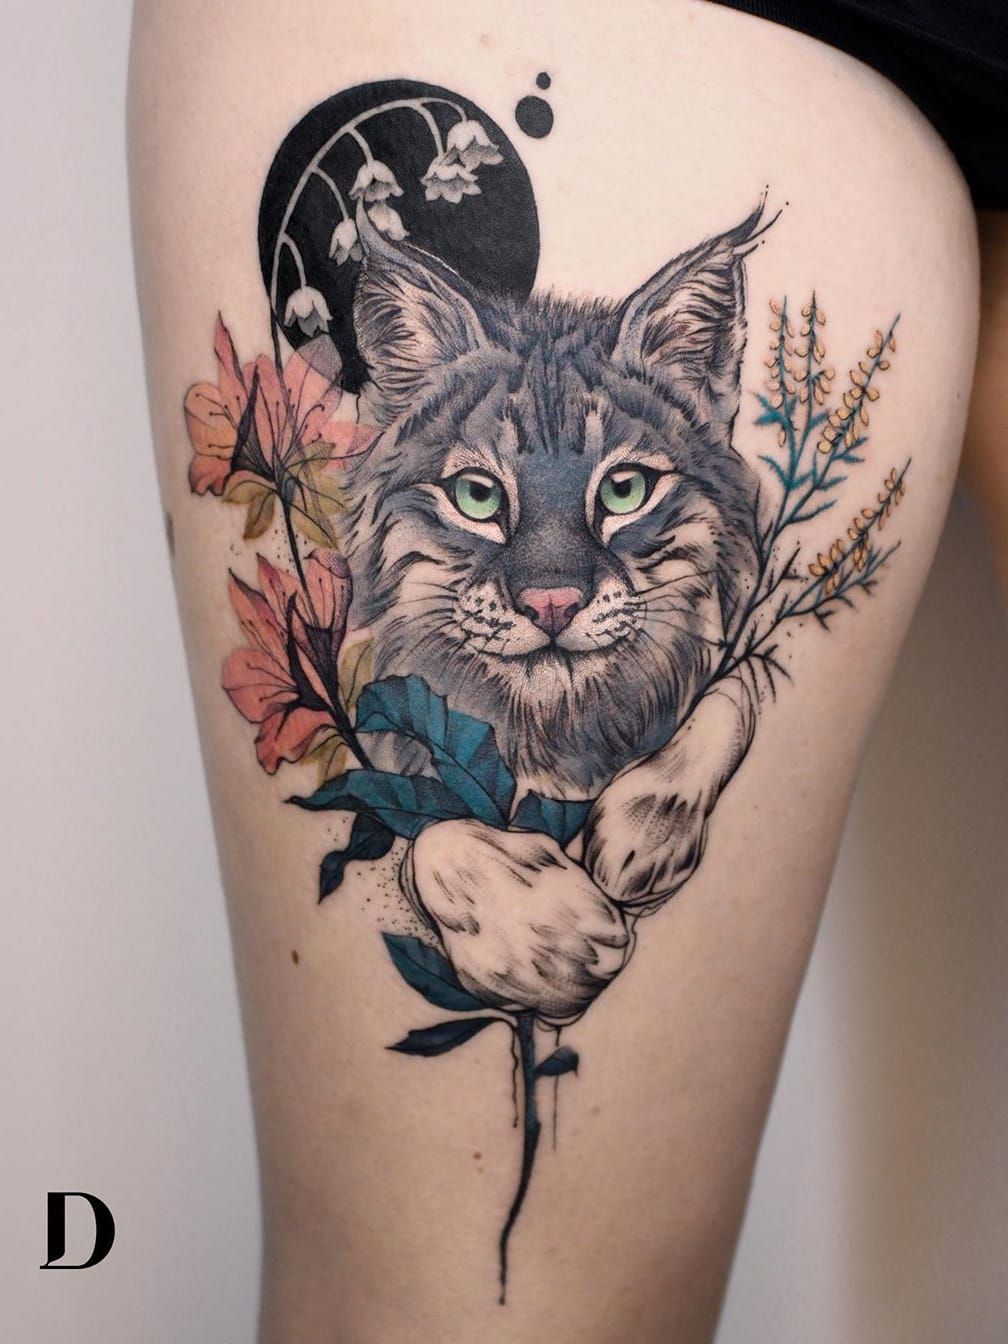 Realistic Black and Grey Cat Tattoo by Led Coult done with Alex Imeno using  Ink Machines and Magic Moon Needles  Tattoos katze Katzentattoos  Katzentattoo